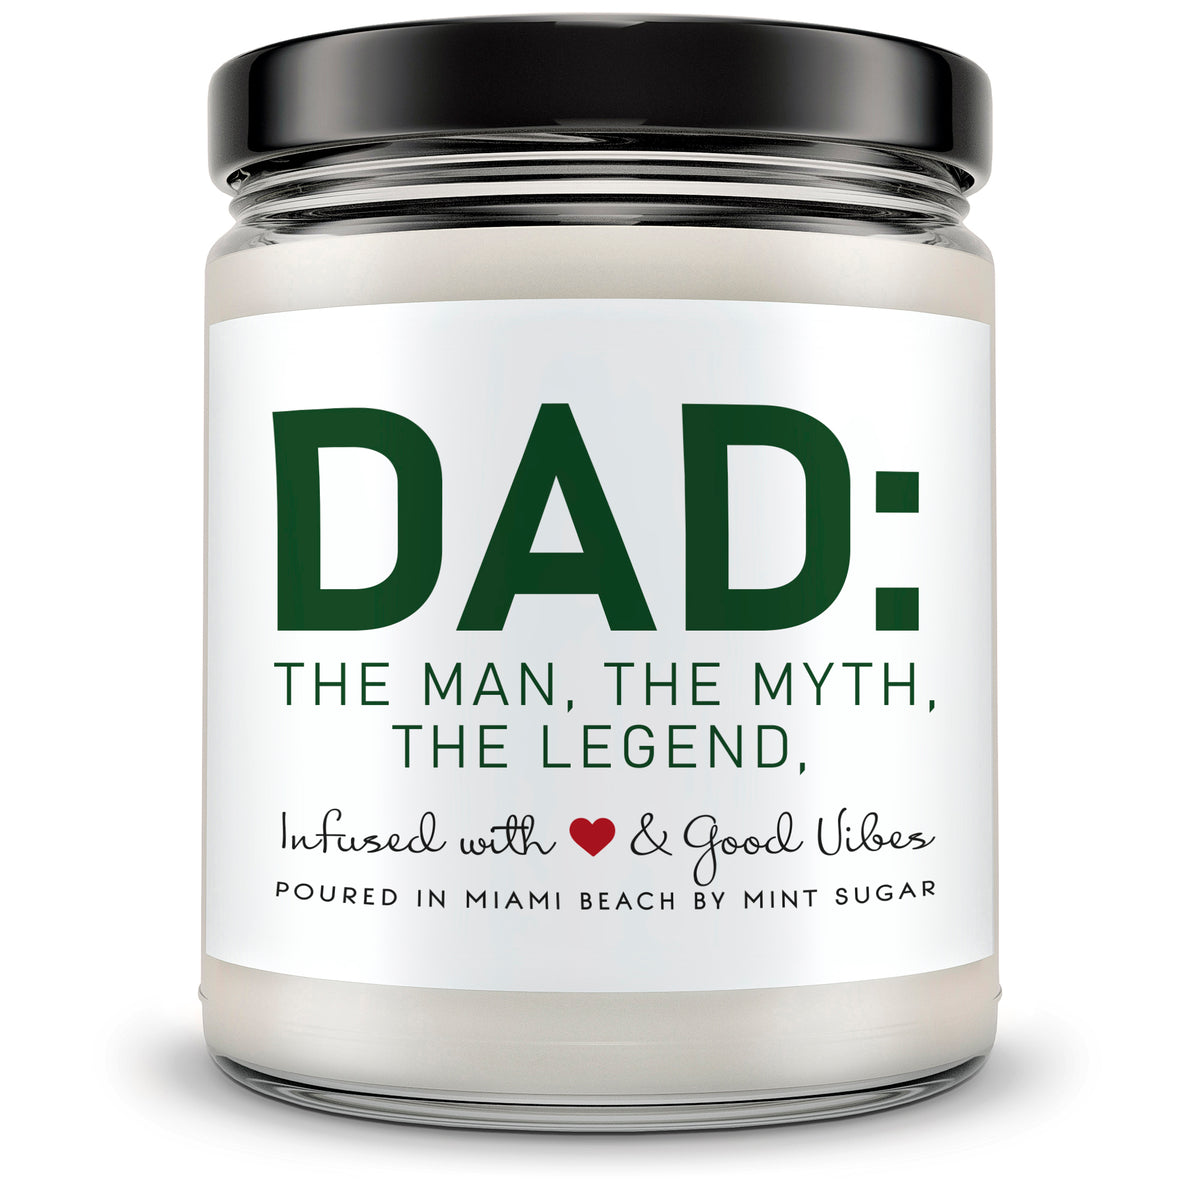 Dad: The Man, The Myth, The Legend - Mint Sugar Candle